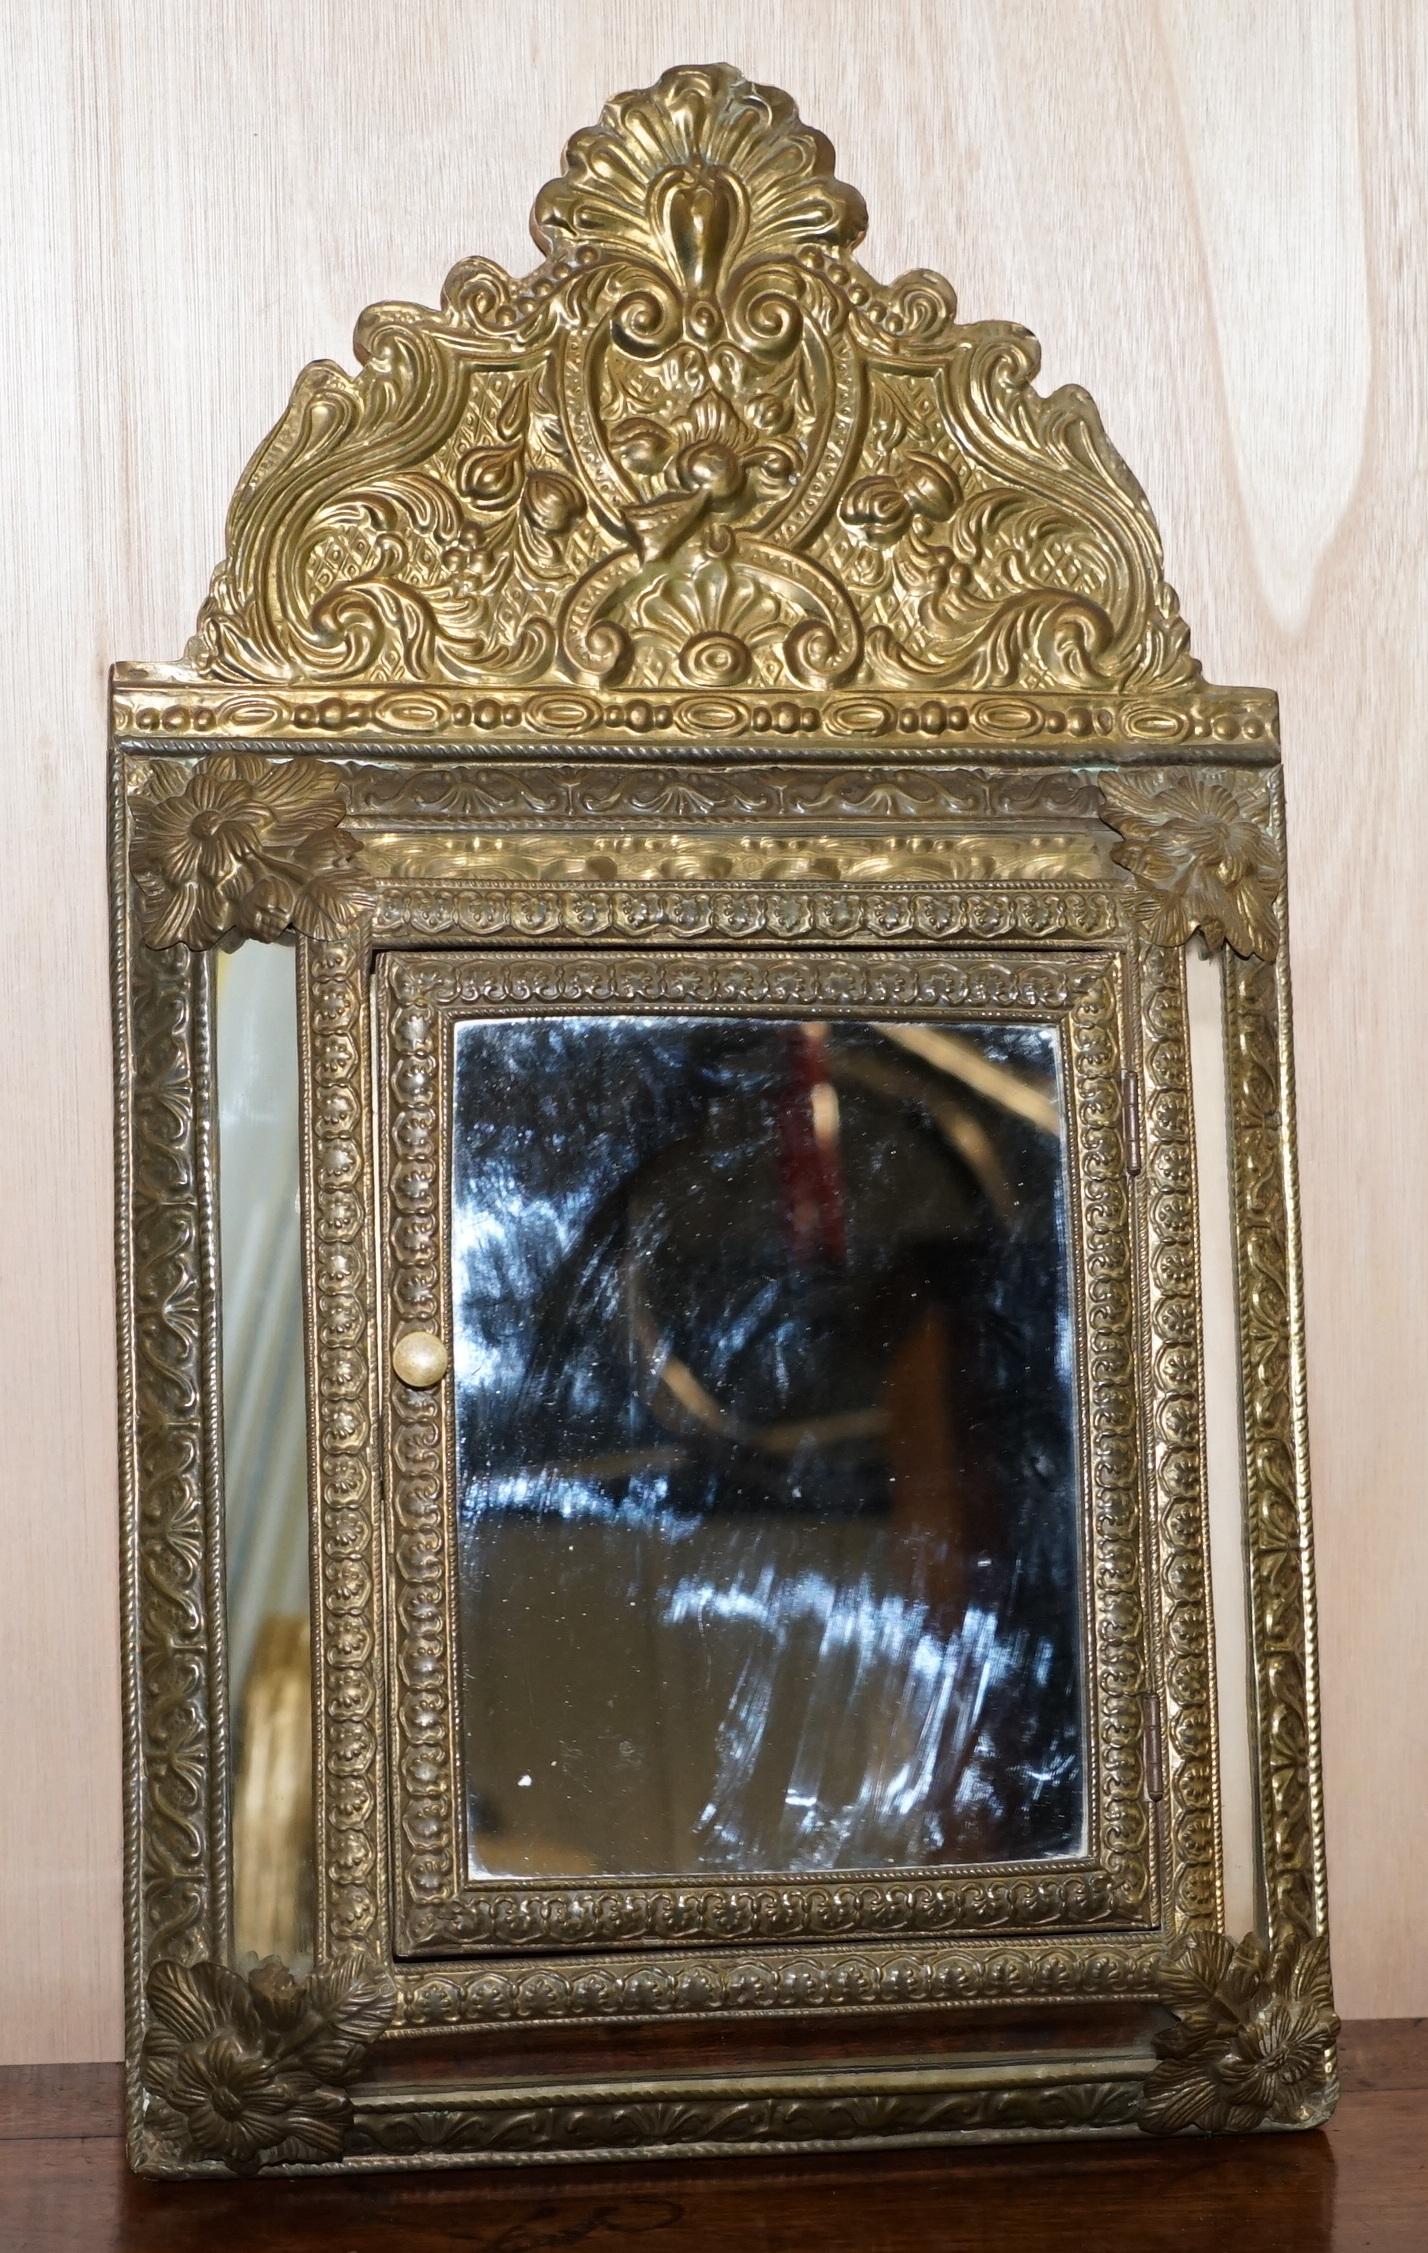 Wimbledon-Furniture

Wimbledon-Furniture is delighted to offer for sale this very decorative Repousse brass mirror with cushioned edges and hooks inside for hanging keys

A good looing collectable and decorative piece, the inside has two hooks